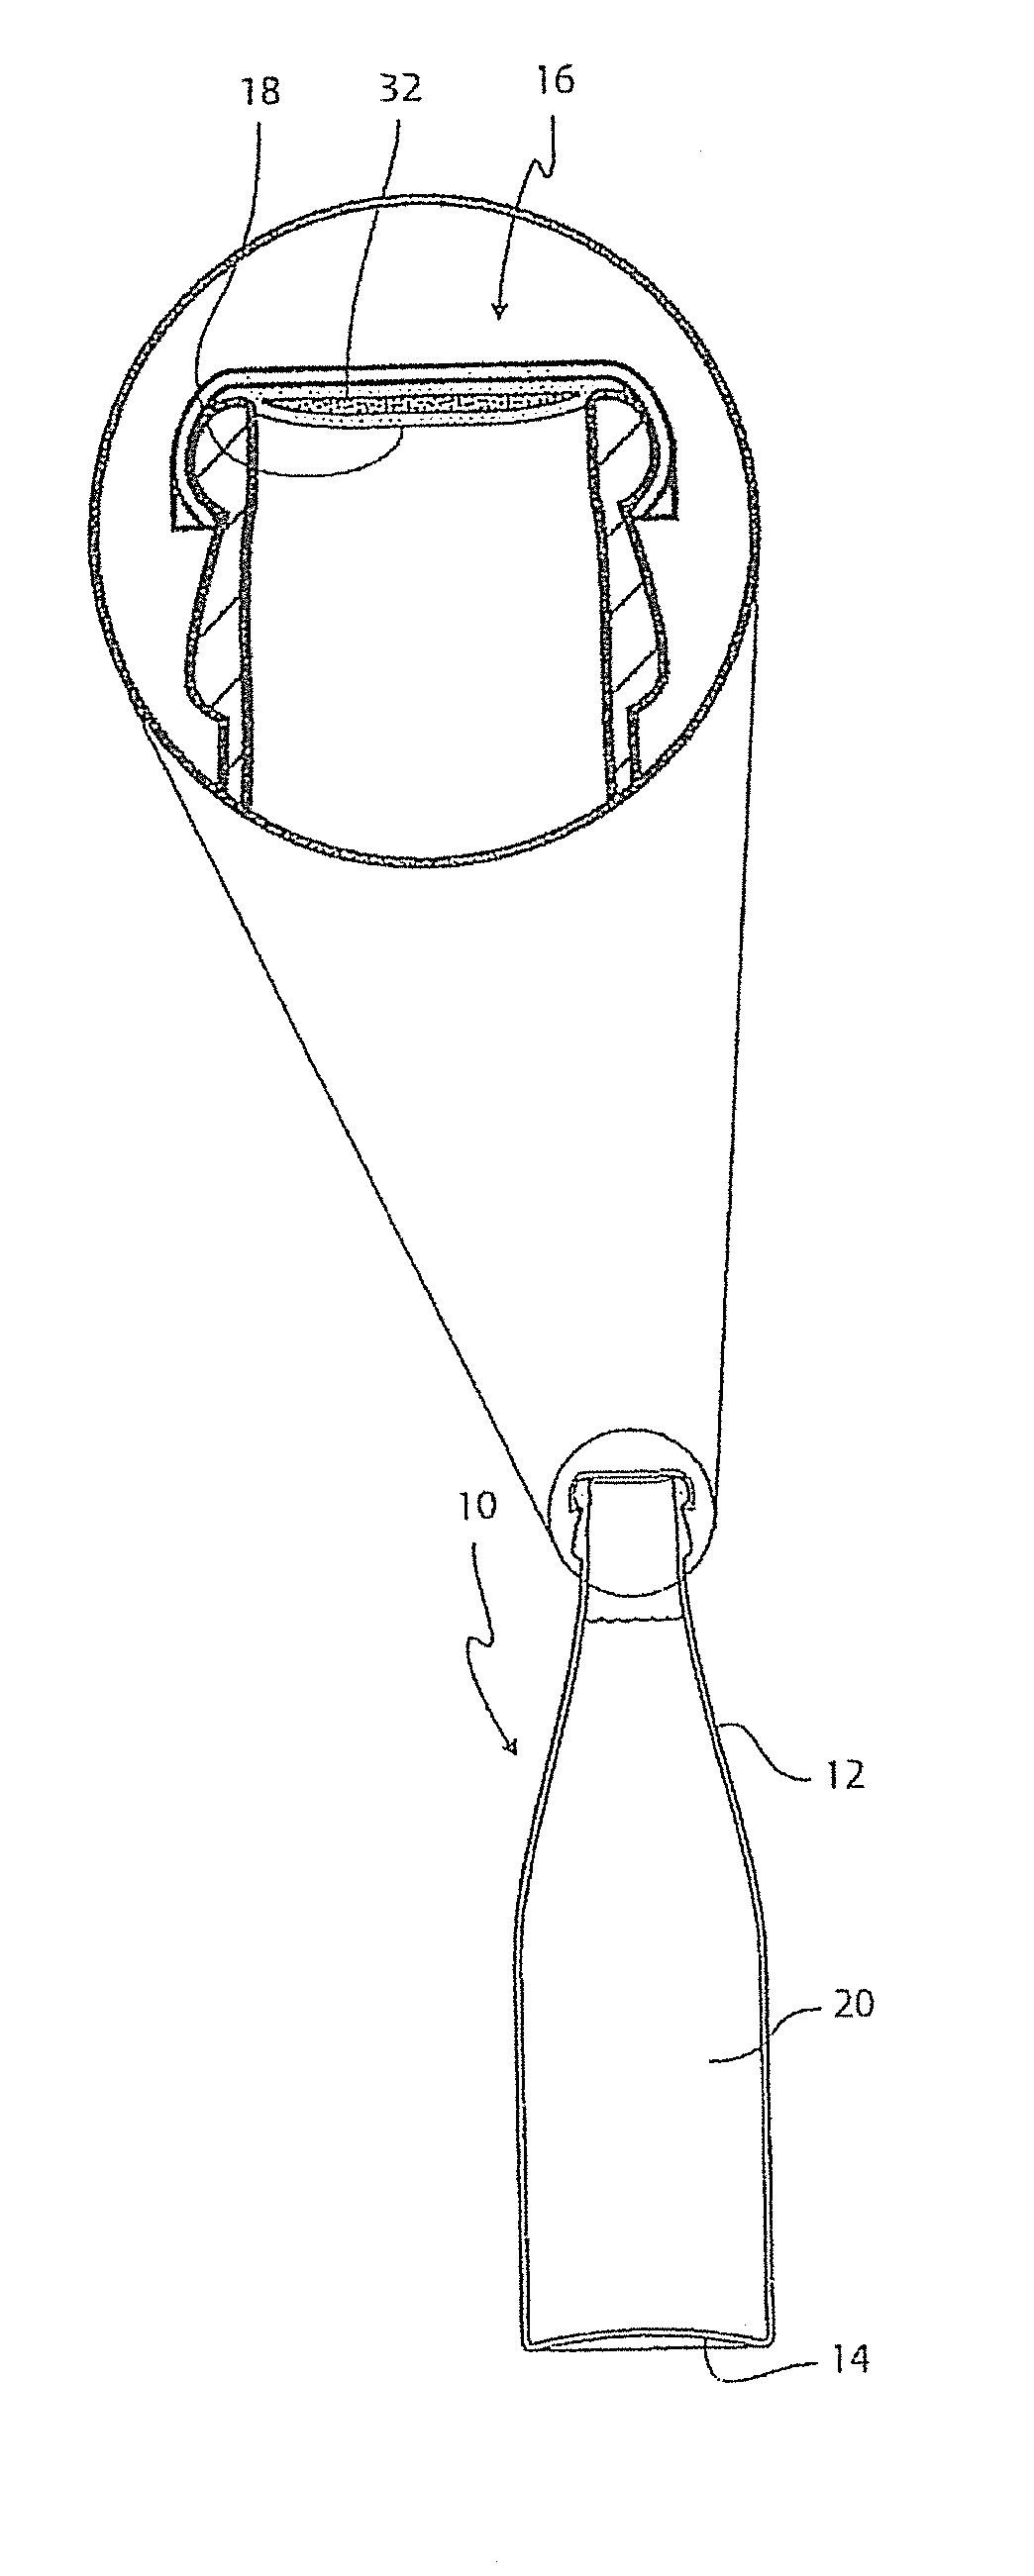 Beverage, a beverage container including a beverage, a method of producing a beverage and a beverage production plant